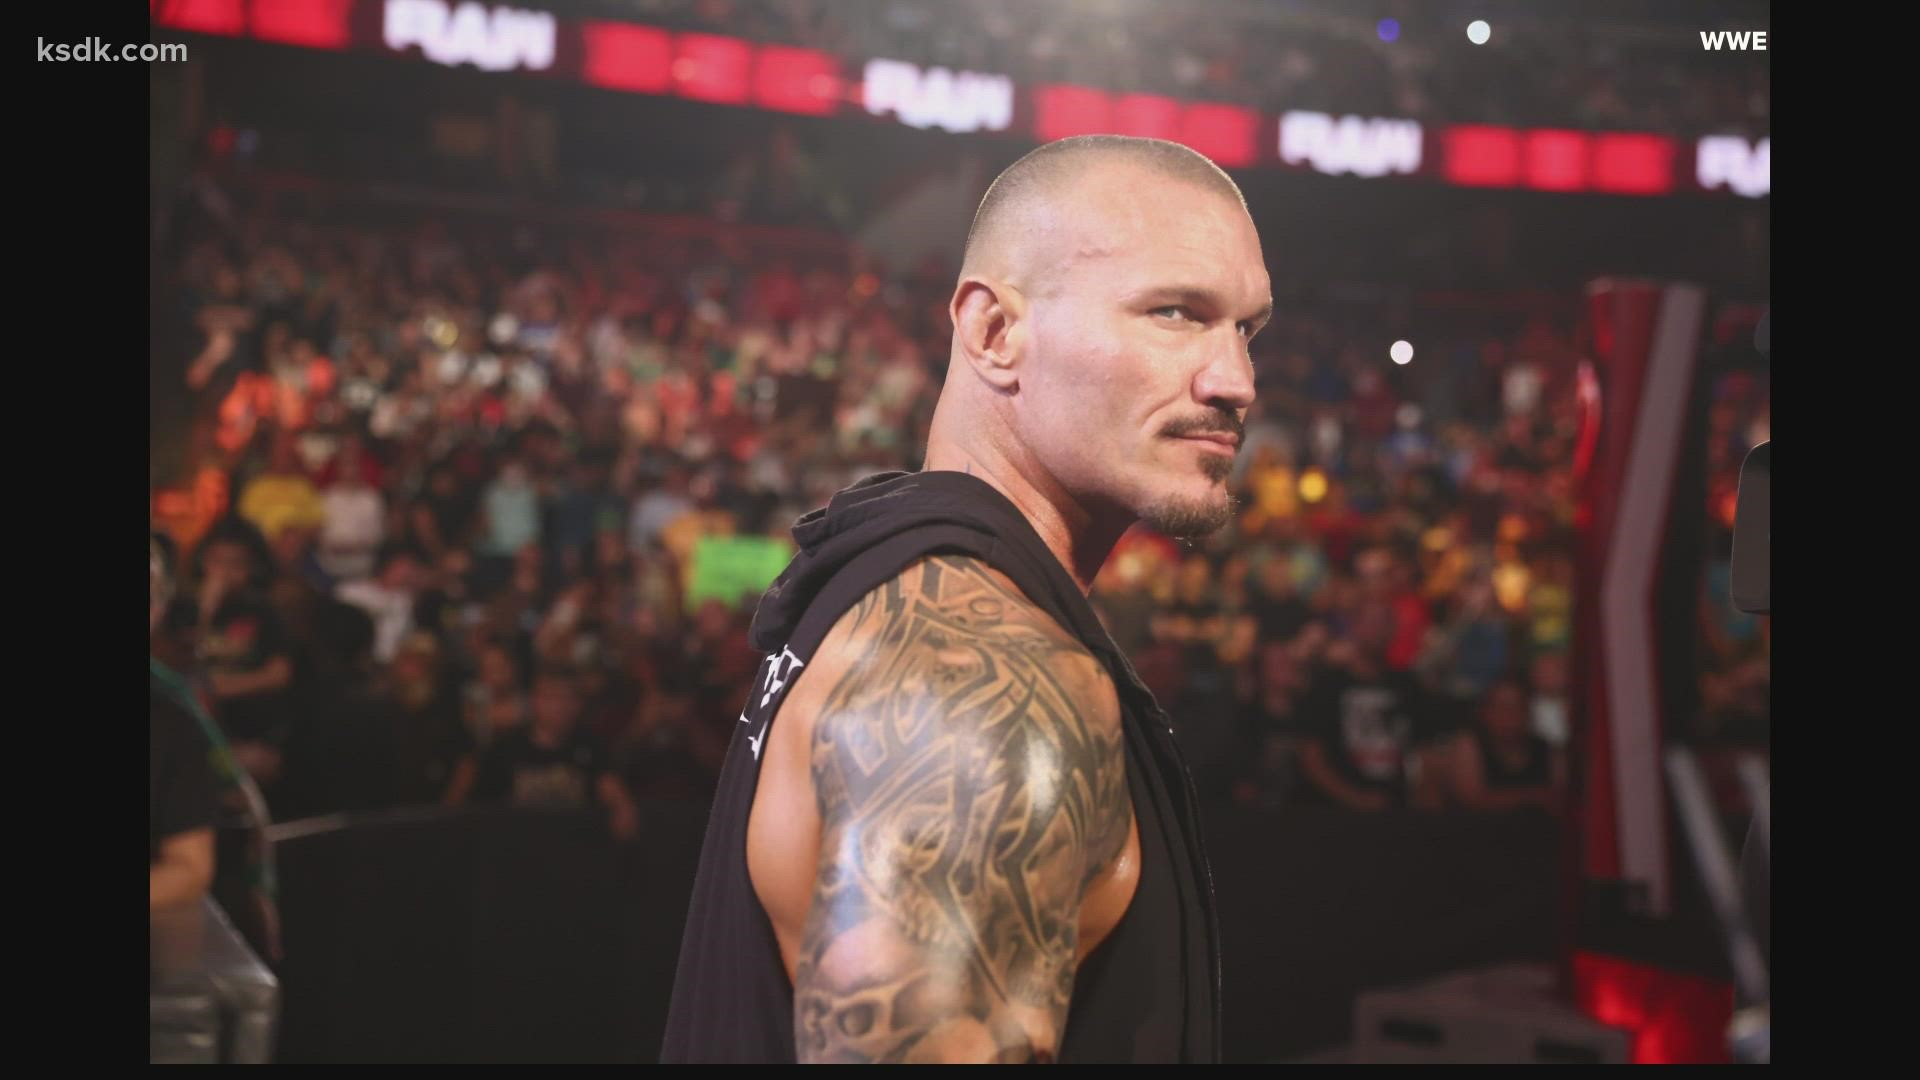 5 On Your Side sat down with one of the most popular superstars in WWE history – St. Louis’ own Randy Orton.